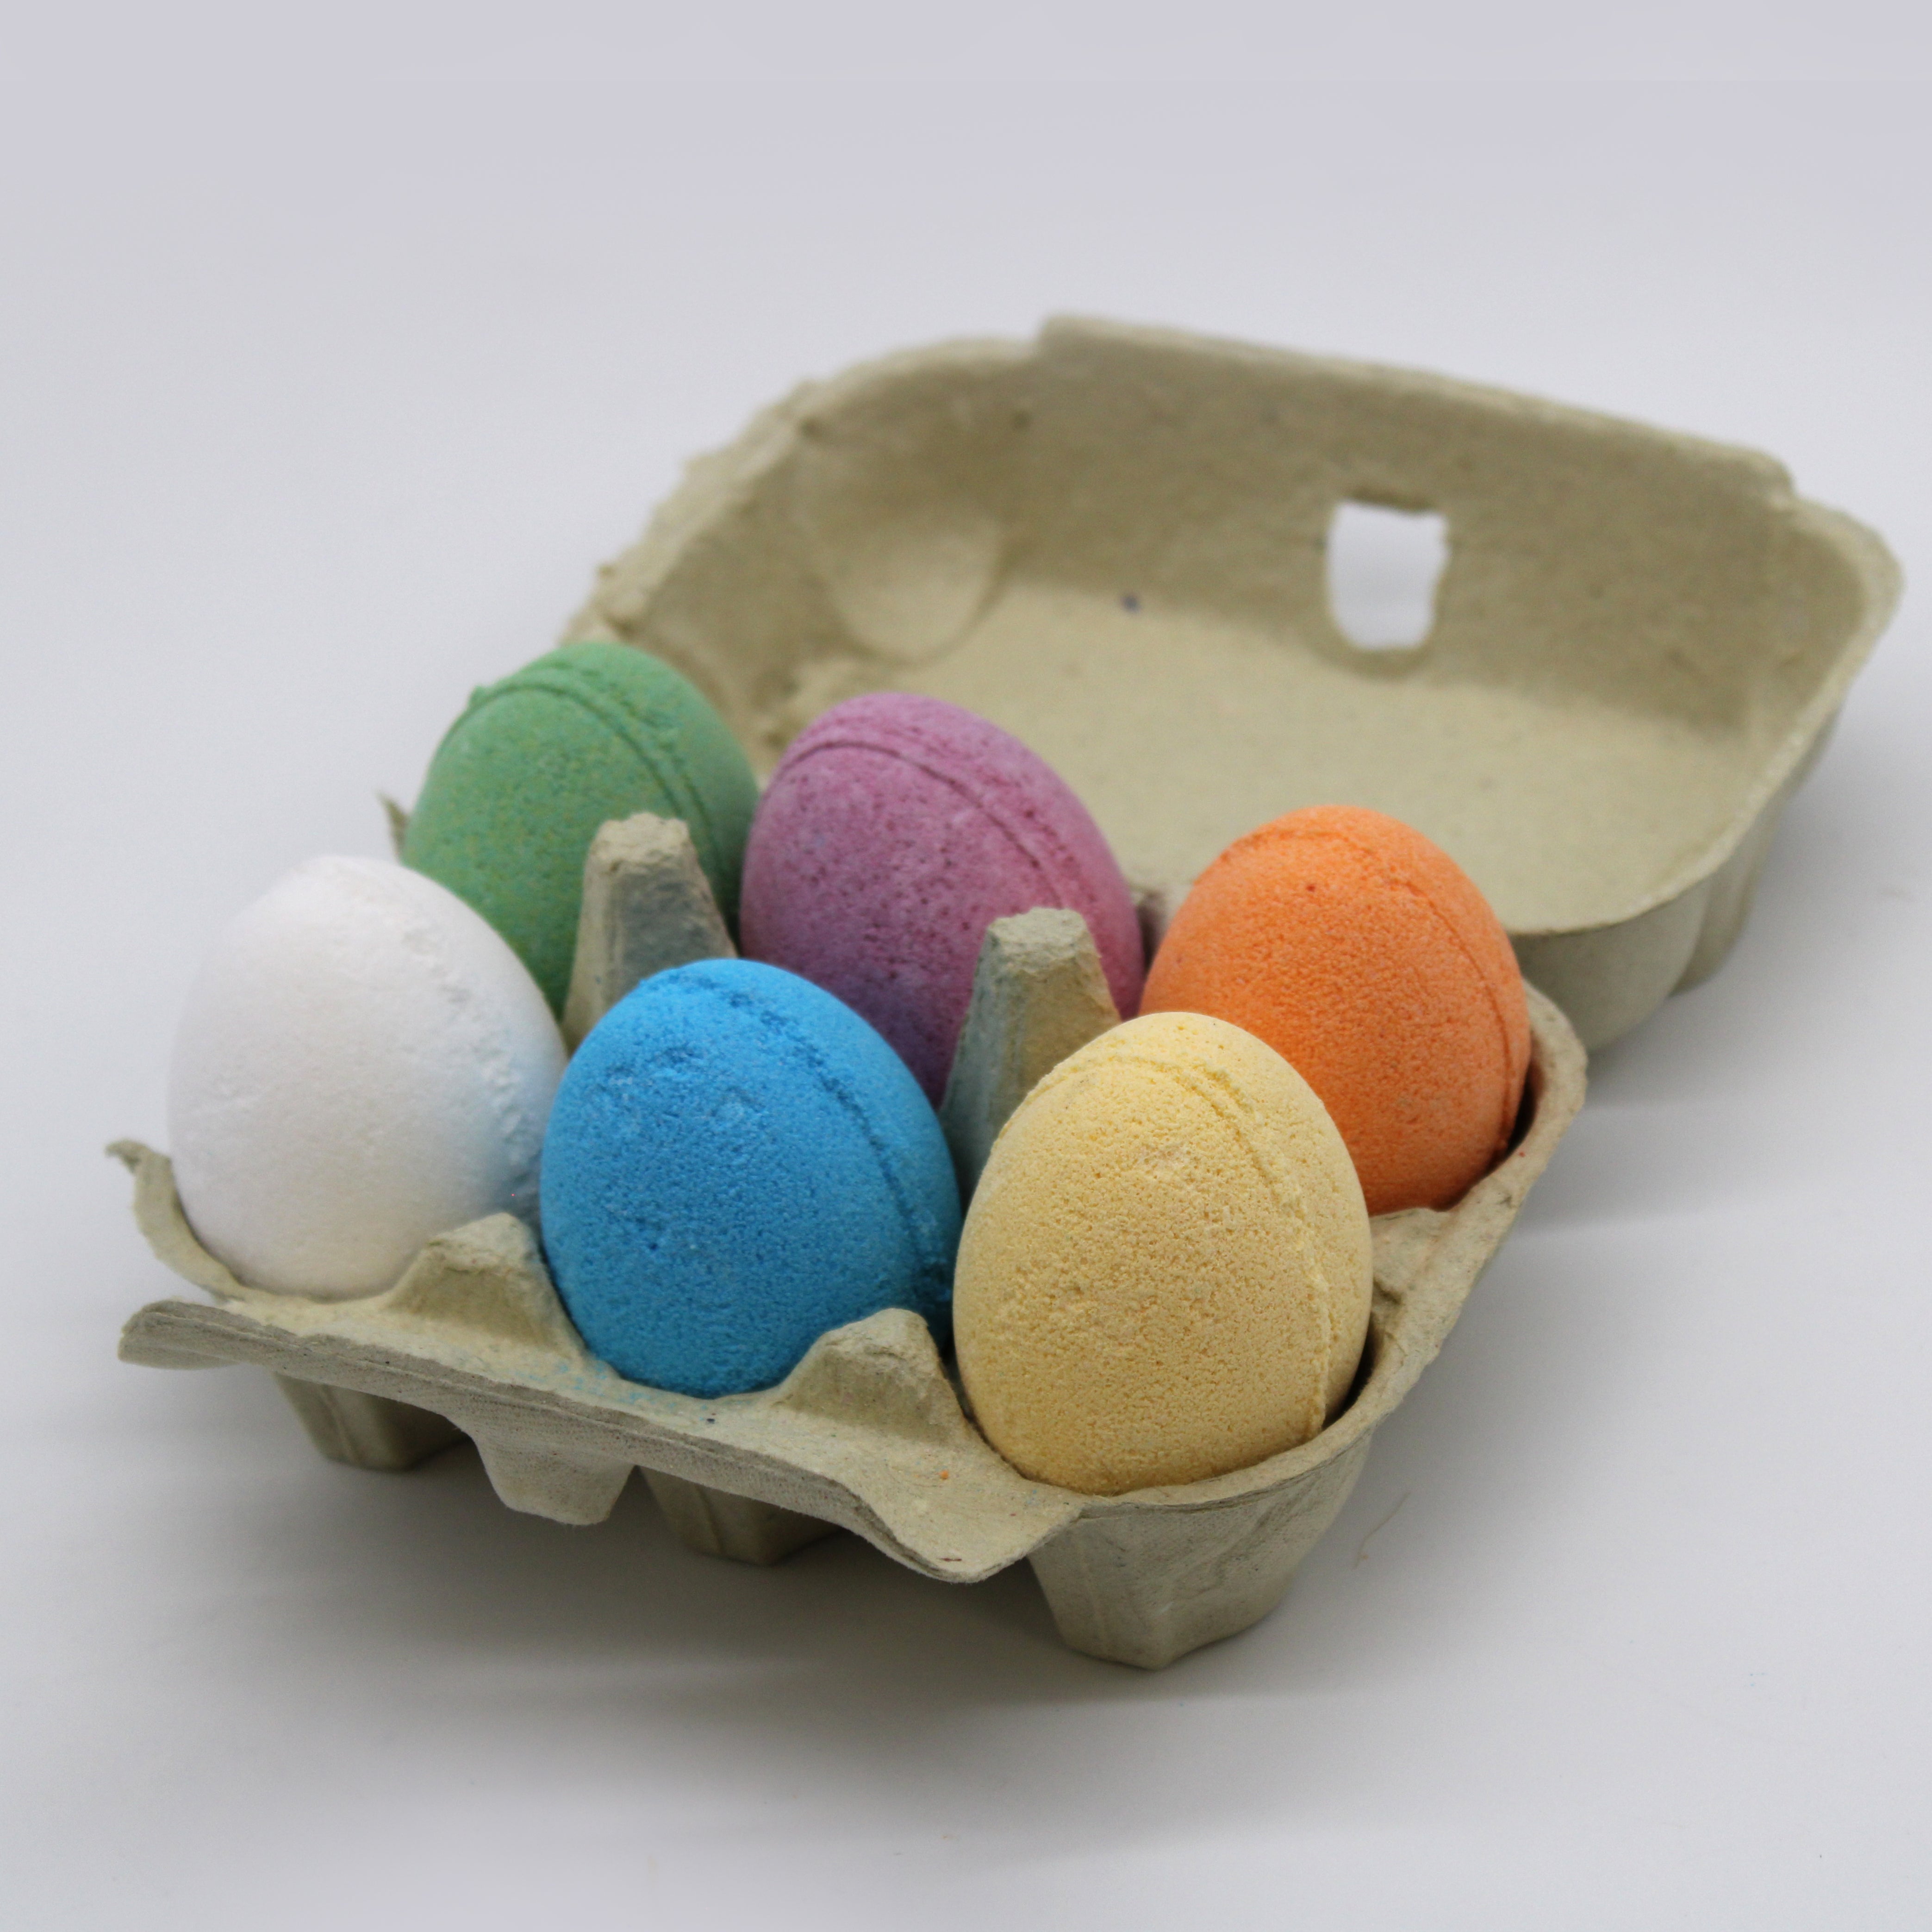 View Pack of 6 Bath Eggs Mixed Tray information